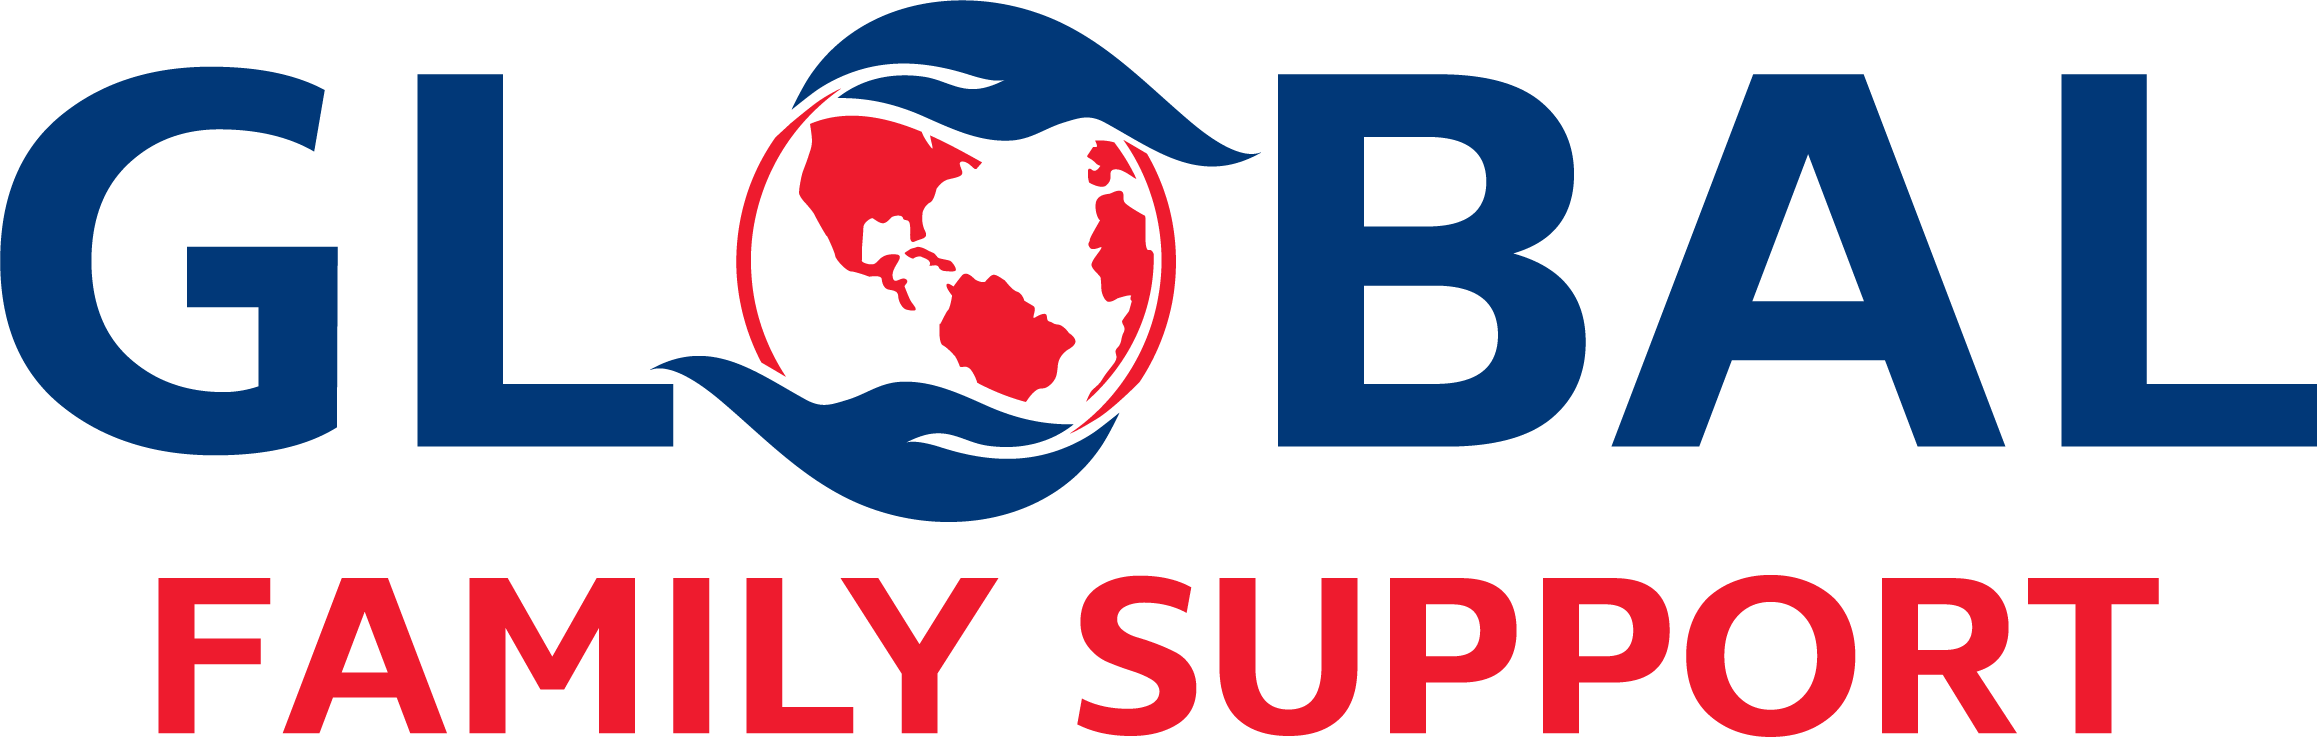 Global Family Support Foundation logo